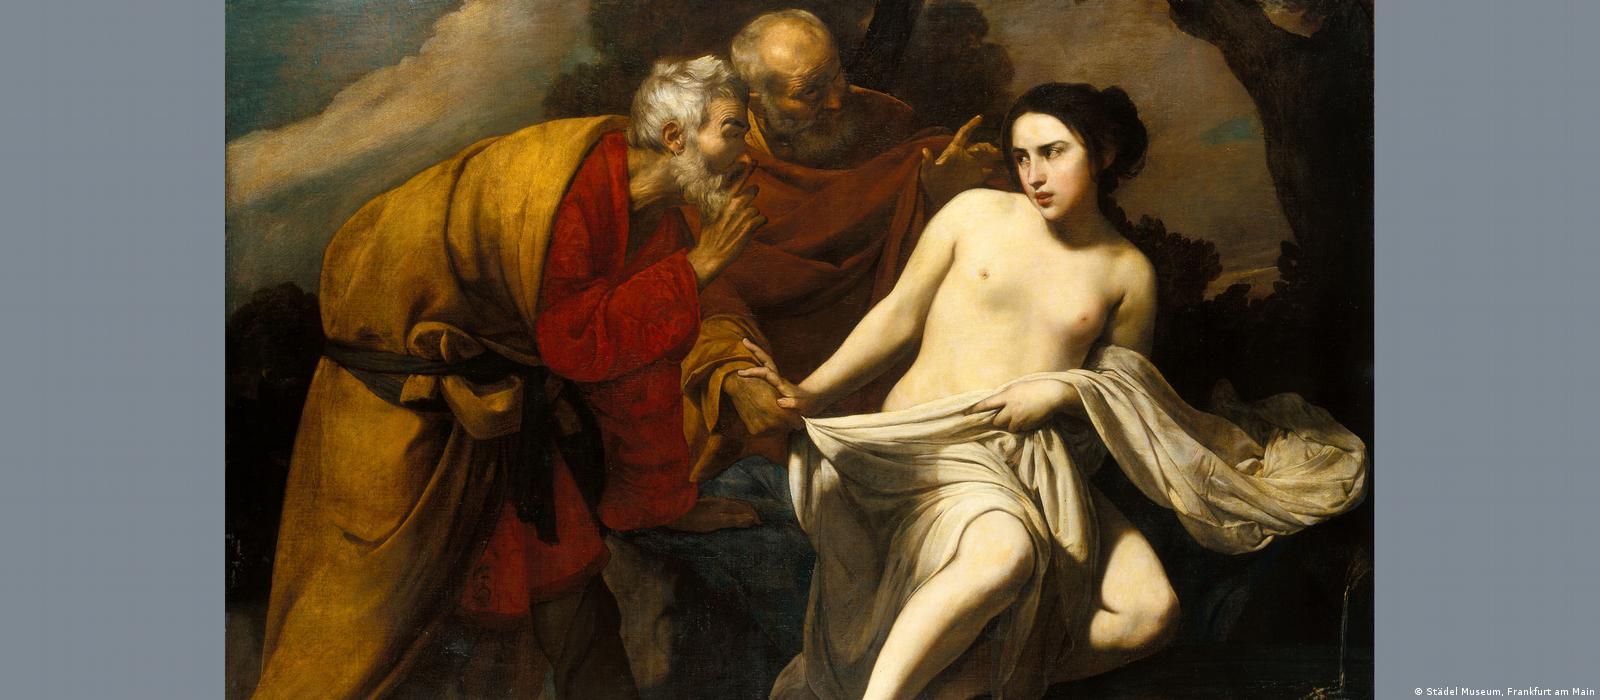 Dangerous ties: 7 high-profile sex scandals in painting | Arthive